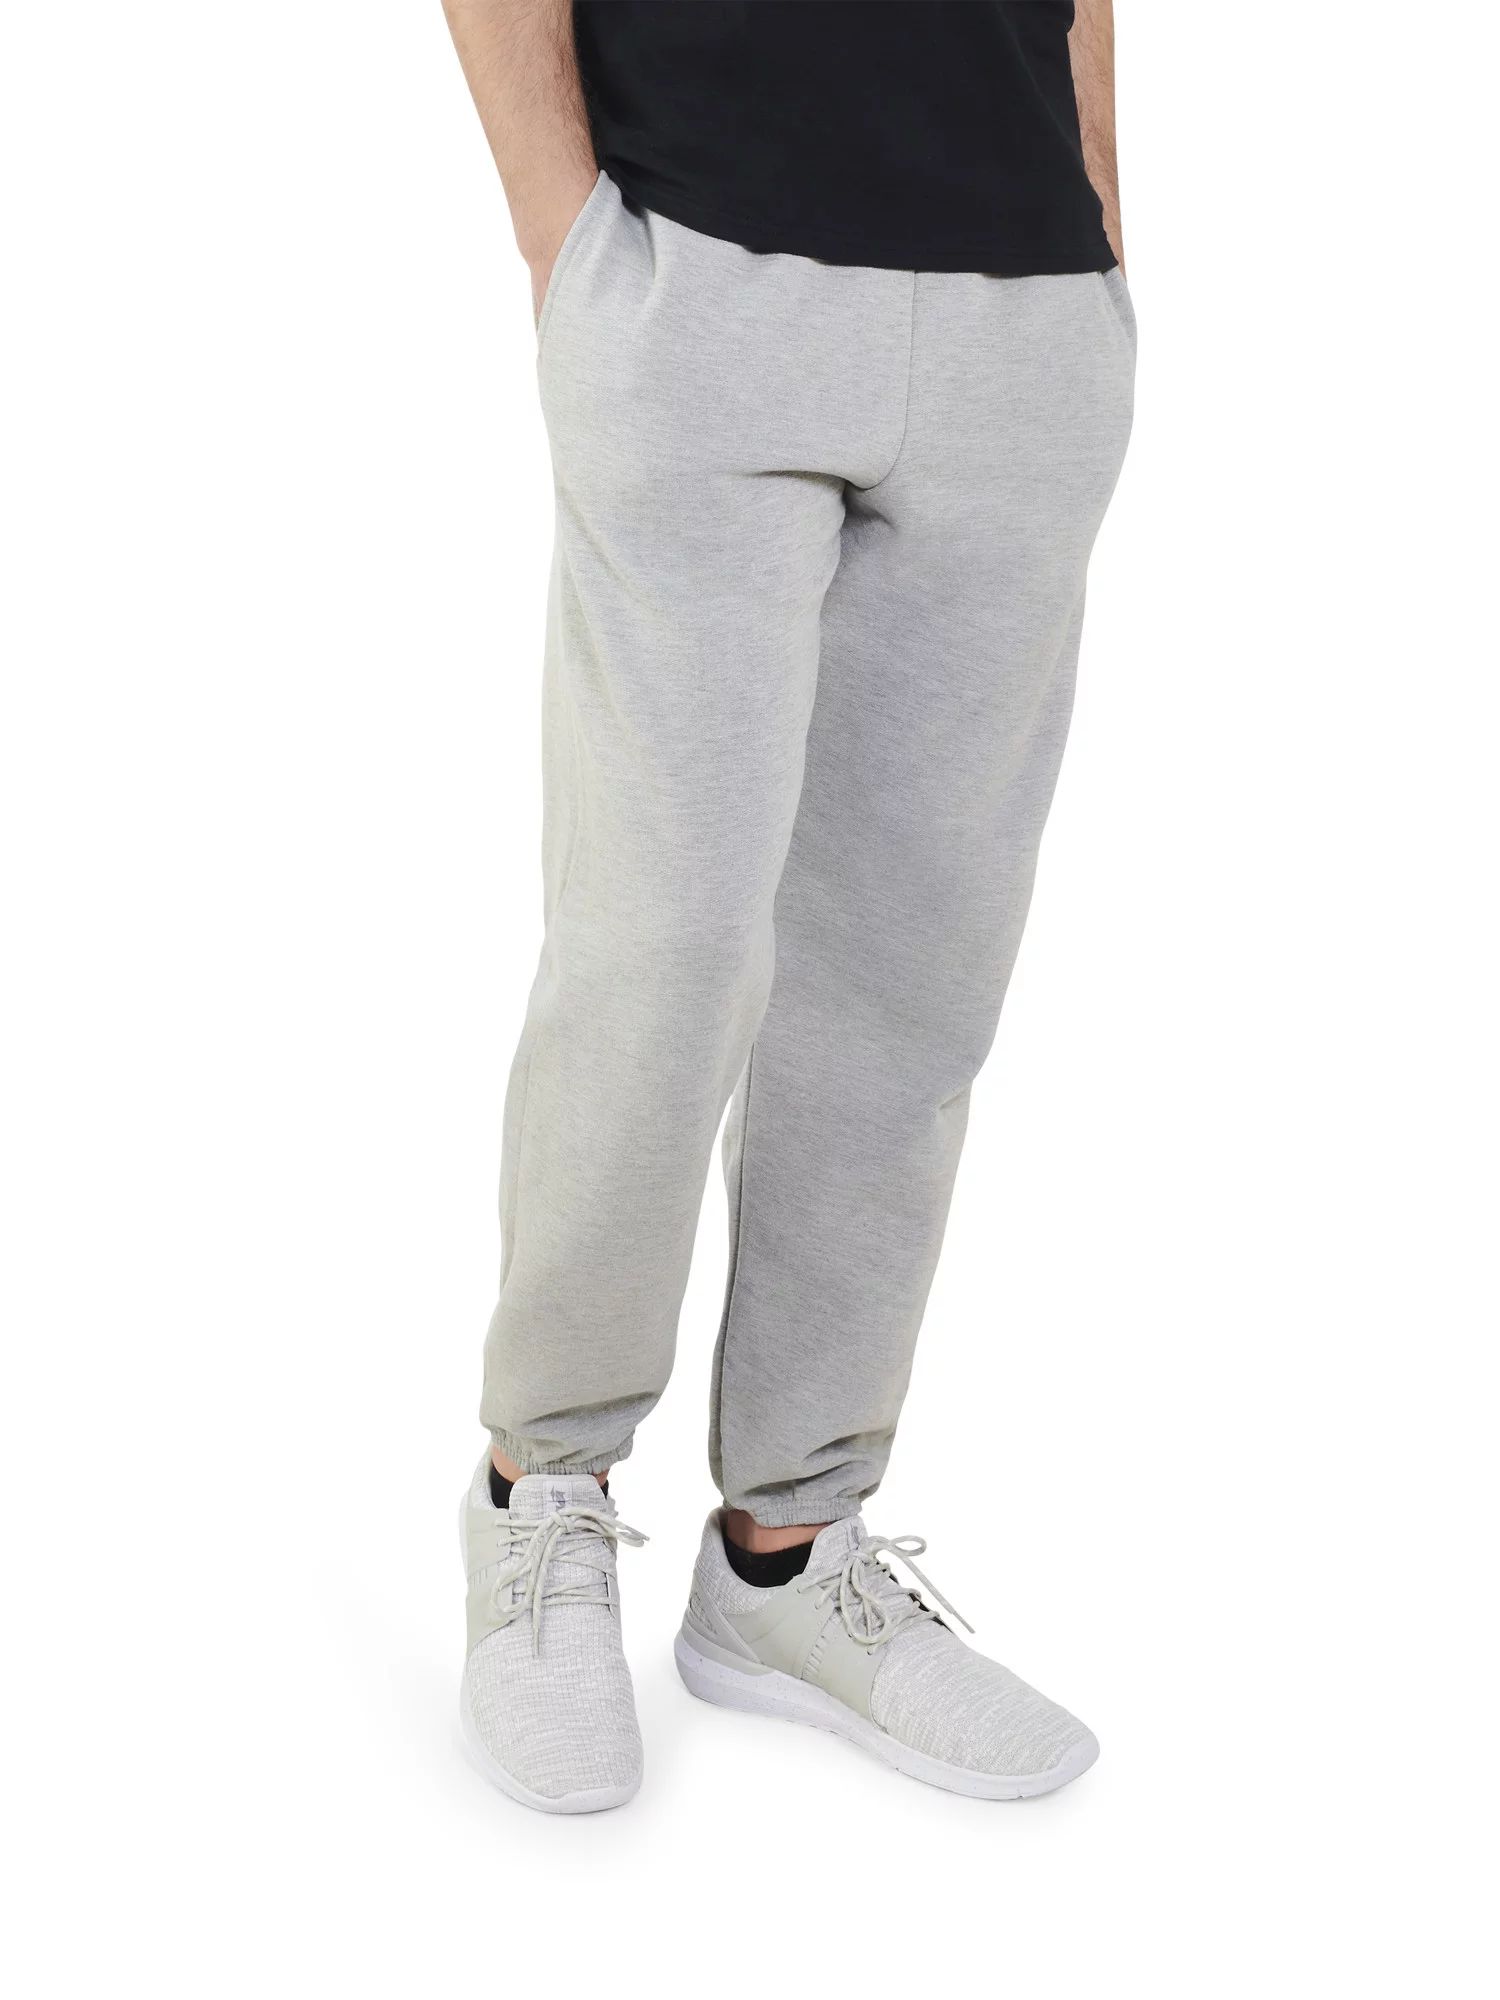 Fruit of the Loom Men's and Big Men's Eversoft Elastic Bottom Sweatpants, up to Size 4XL | Walmart (US)